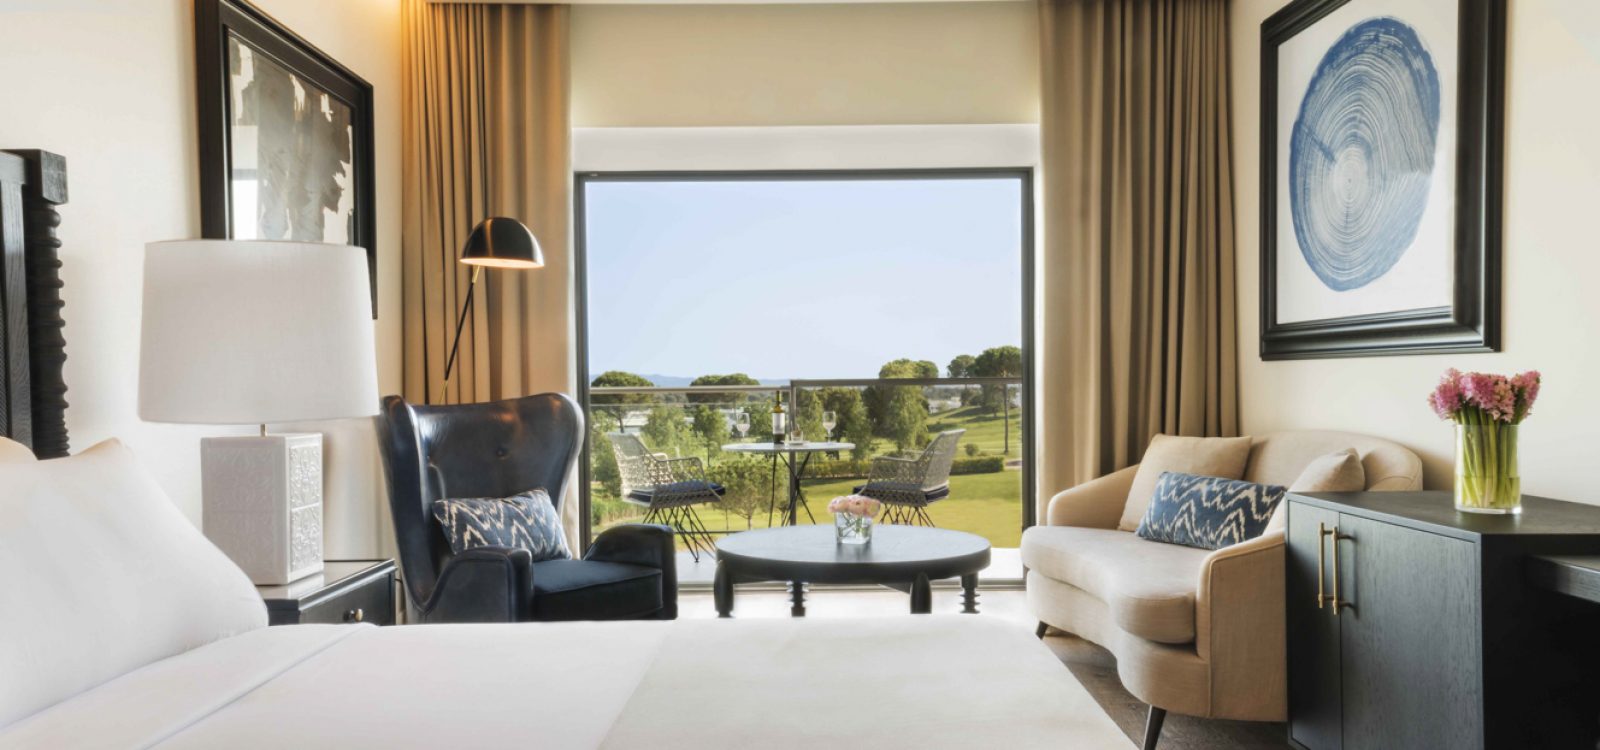 Room 211; Golf; Hotel Camiral; PGA Catalunya Resort; five star hotel photography by Michelle Chaplow